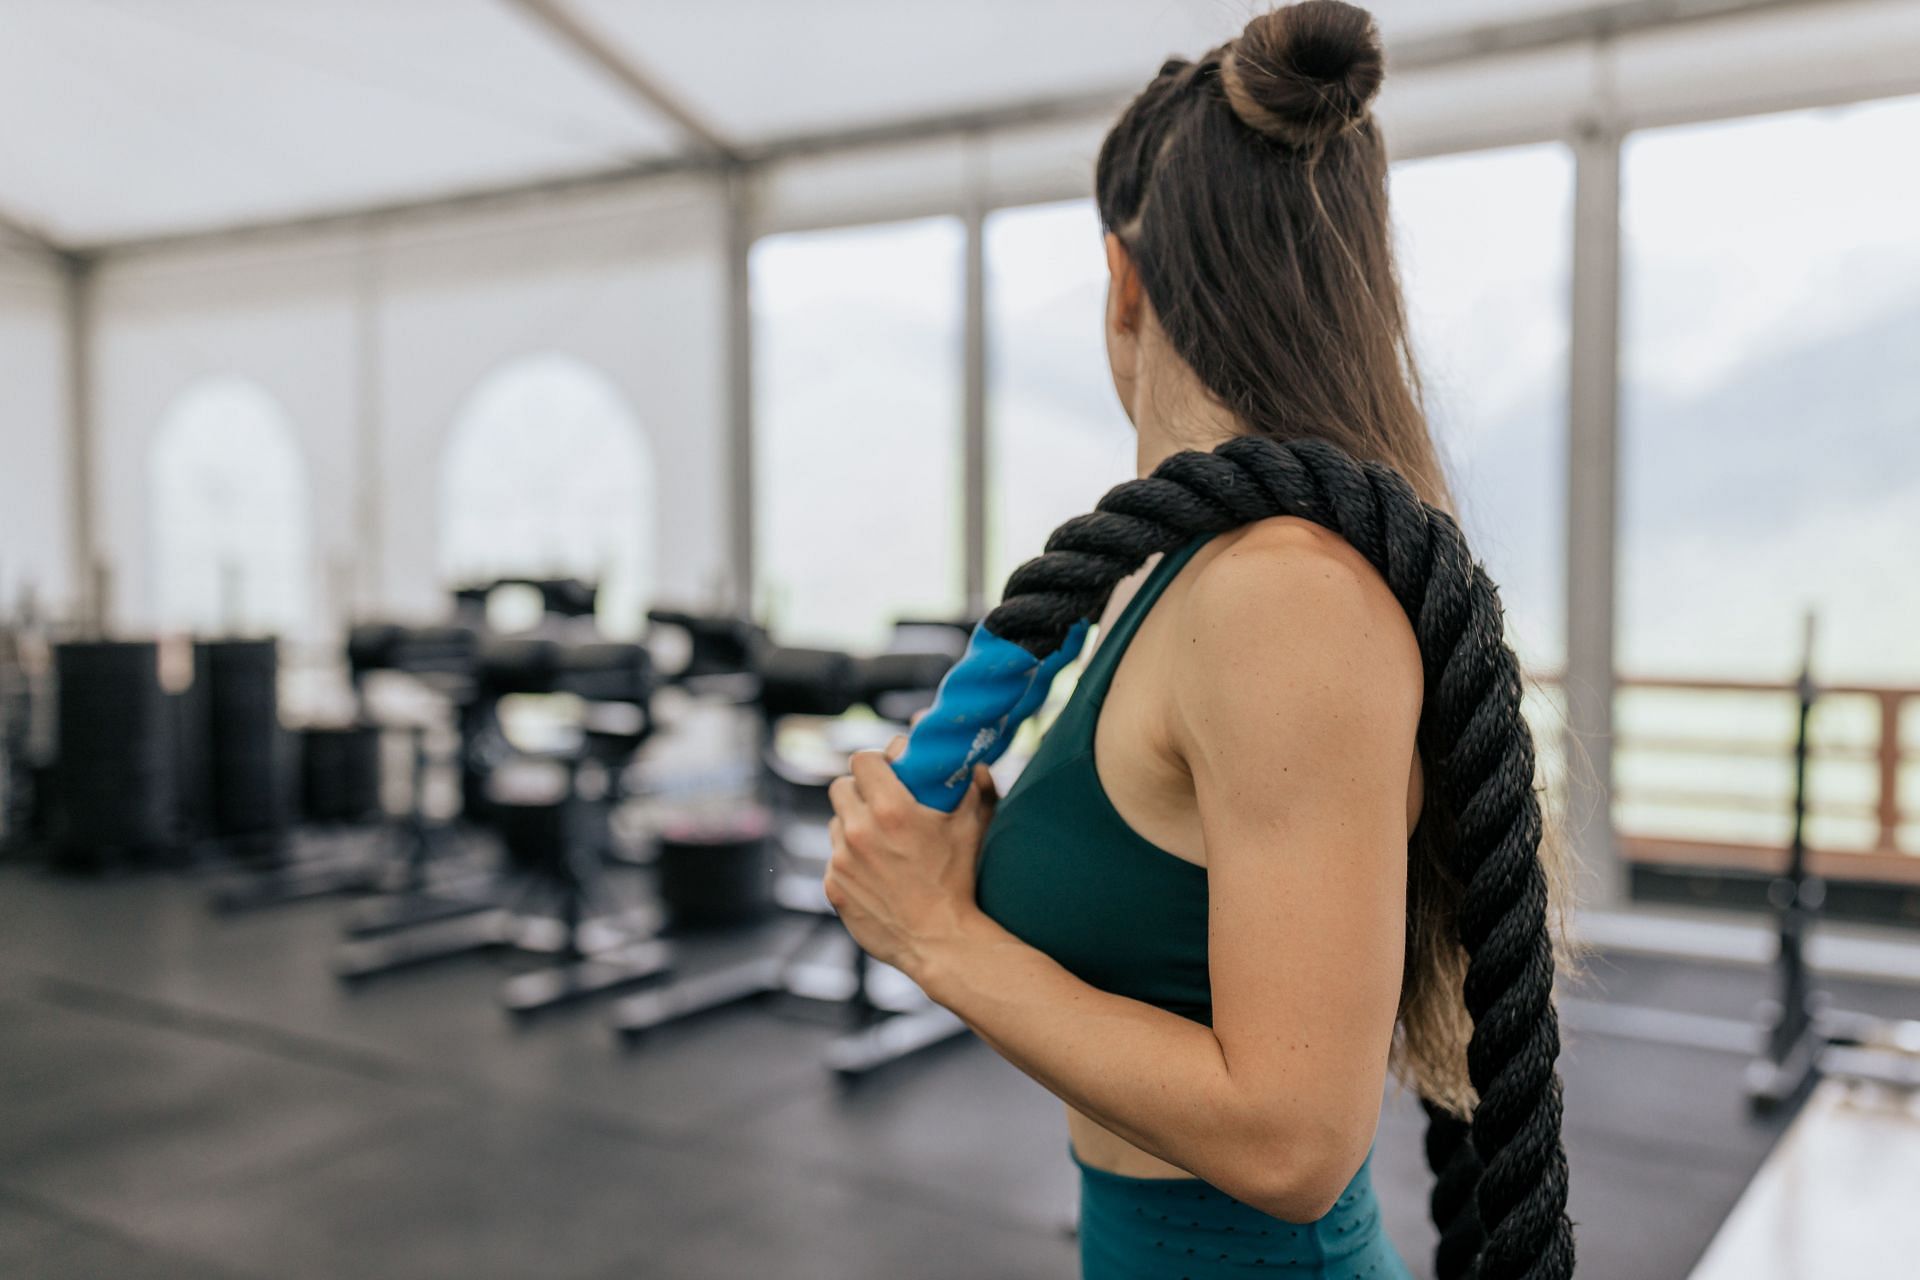 Battle ropes are used for high-intensity strength-building and calorie-burning (Image via Pexels/ Anastasia Shuraeva)